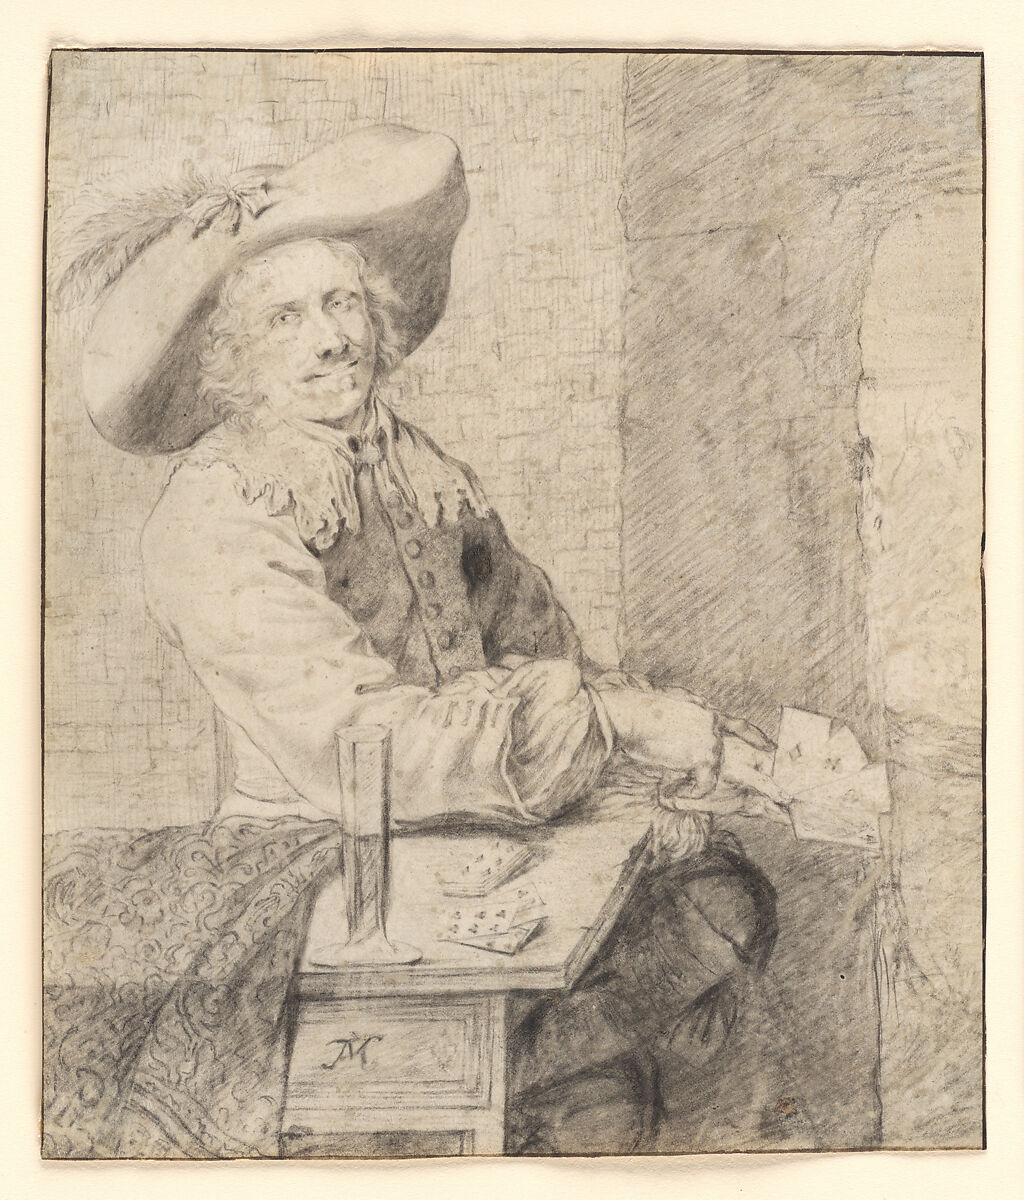 The Cardplayer, copy after Frans van Mieris the Elder (Dutch, Leiden 1635–1681 Leiden), Black chalk, probably moistened in certain areas, and gray wash on vellum. 